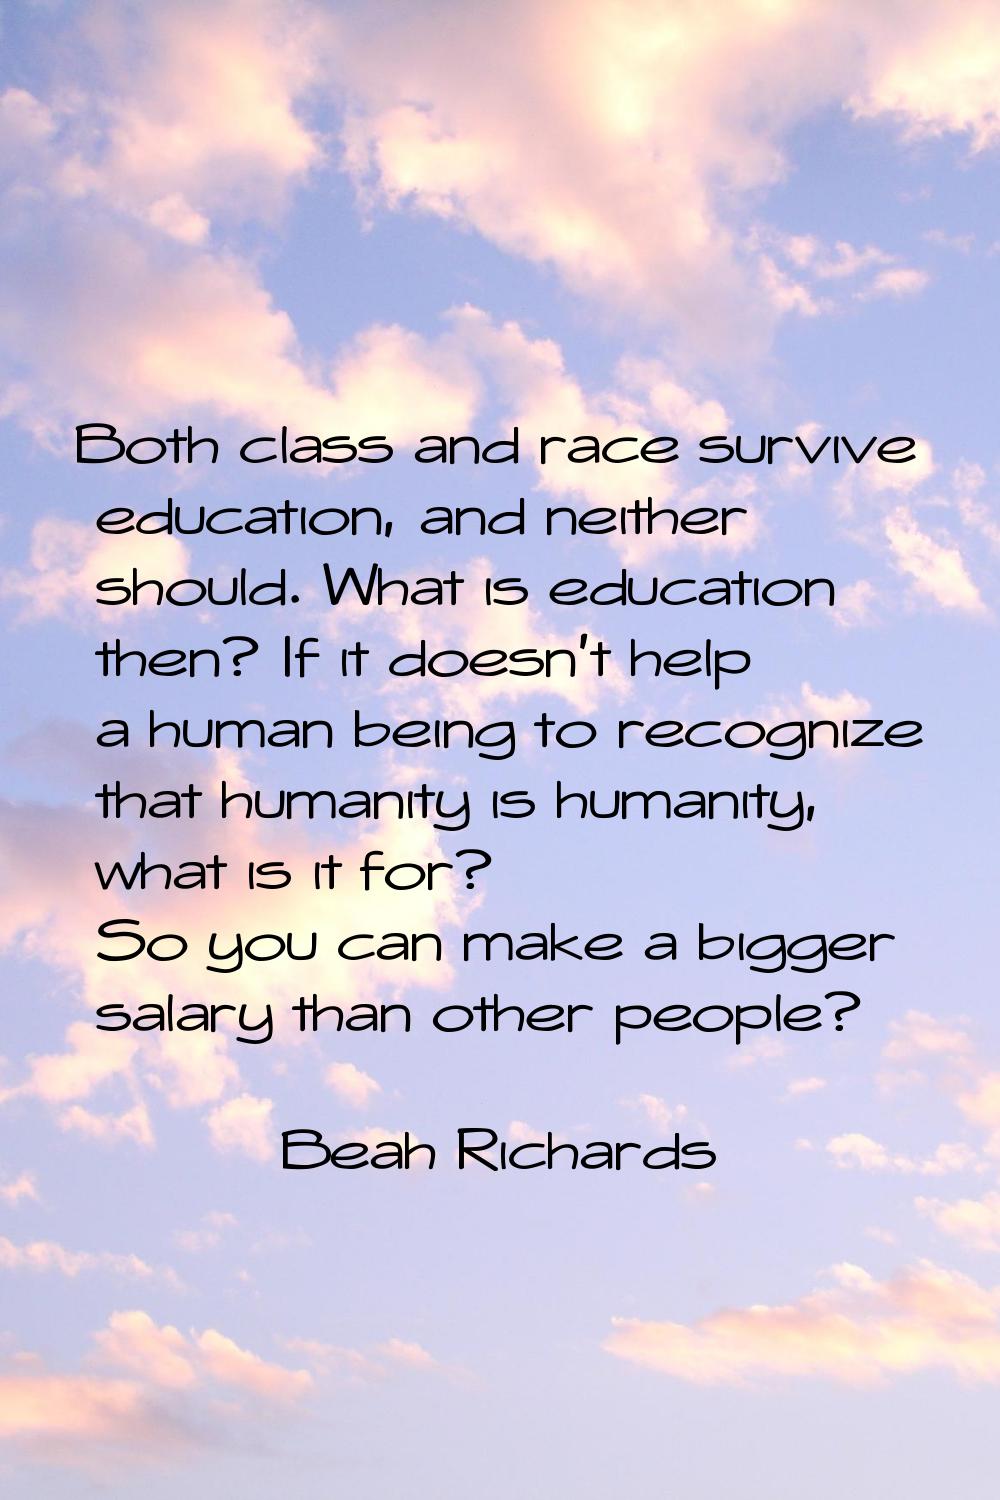 Both class and race survive education, and neither should. What is education then? If it doesn't he